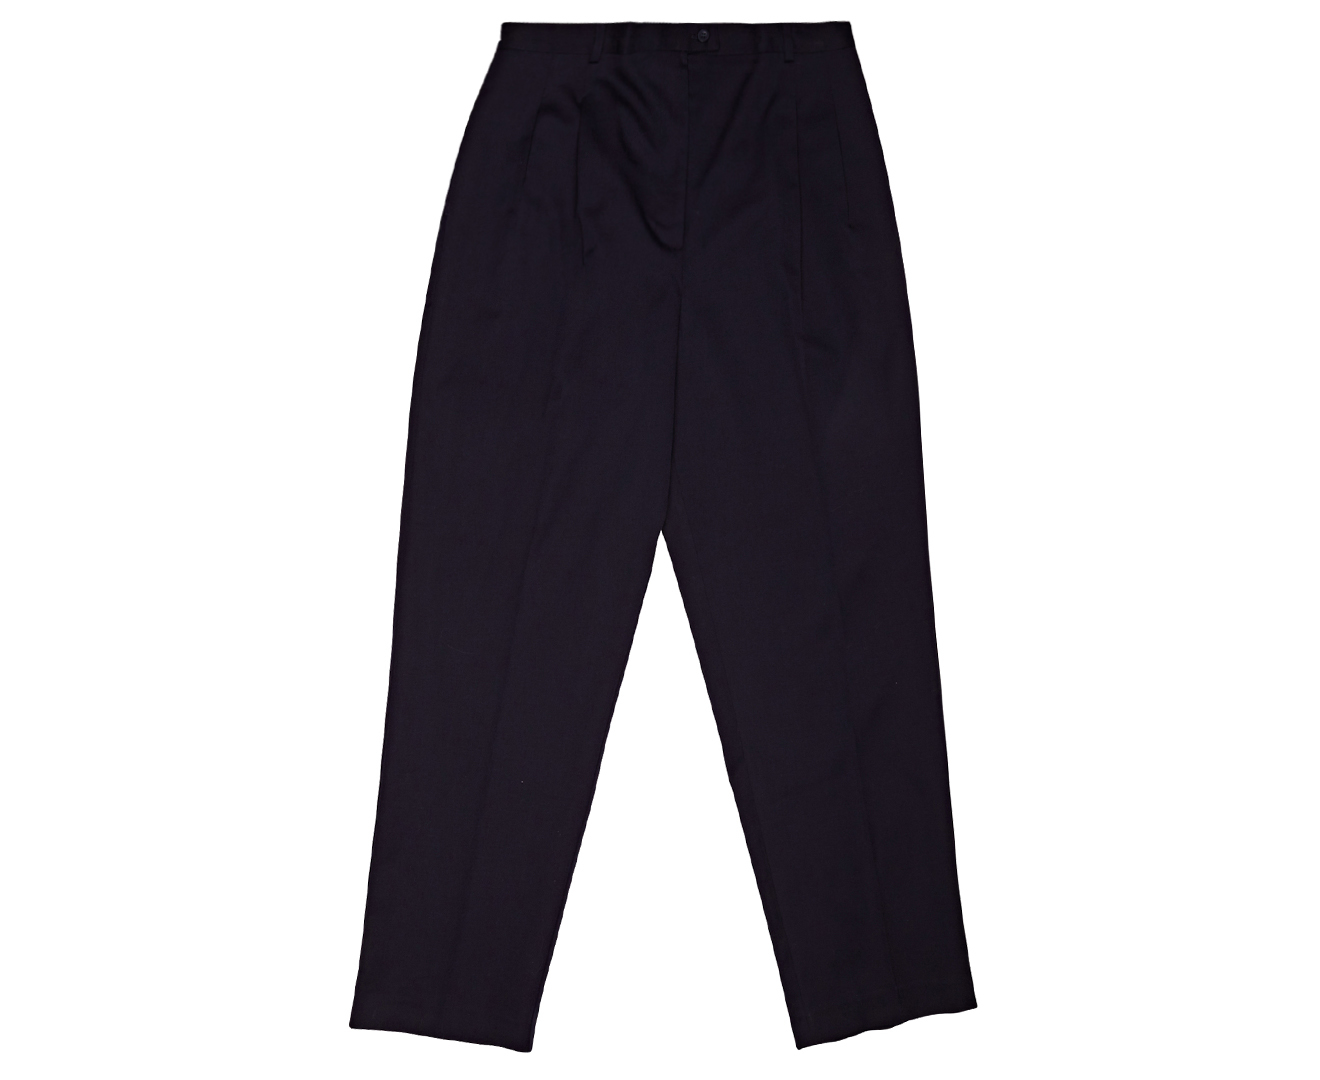 Totally Corporate Women's Size 16 Pant - Navy | Catch.co.nz